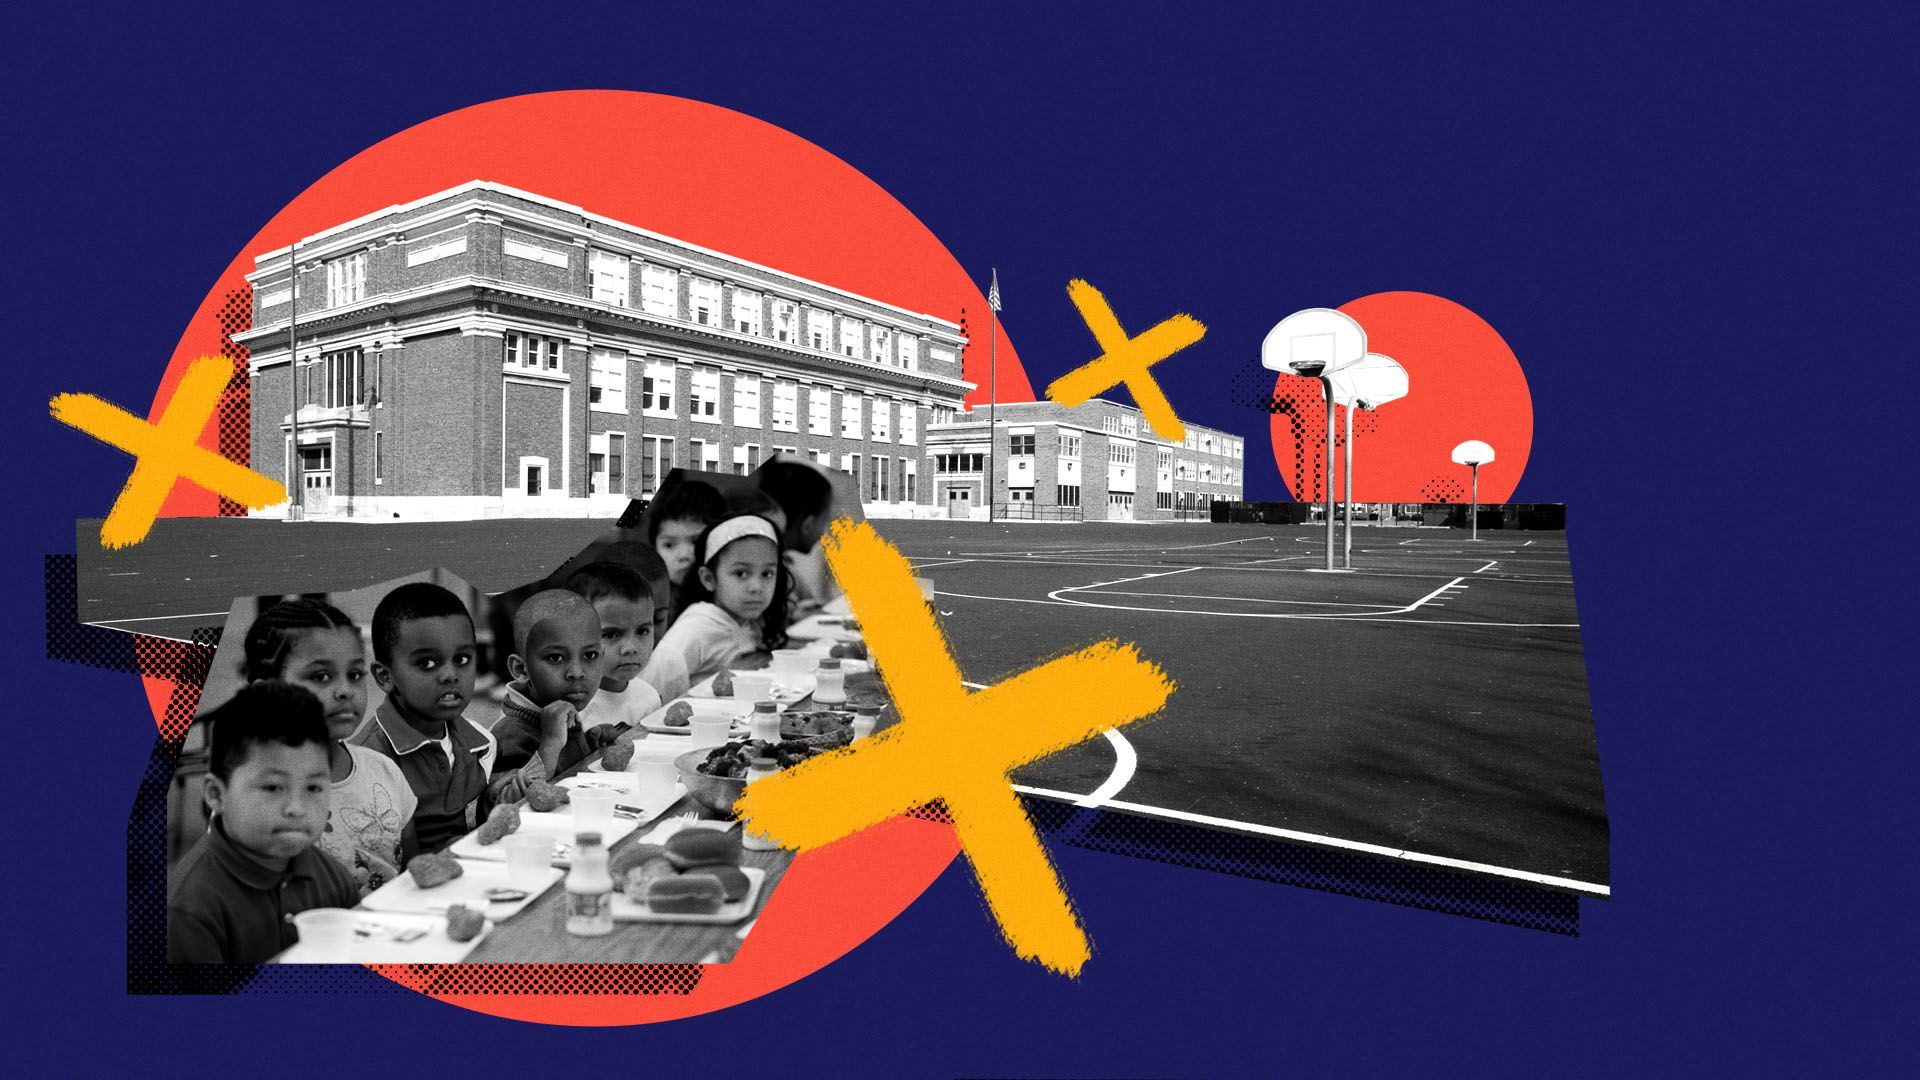 Photo illustration of a public school with group of young students eating lunch at a New Hampshire elementary school